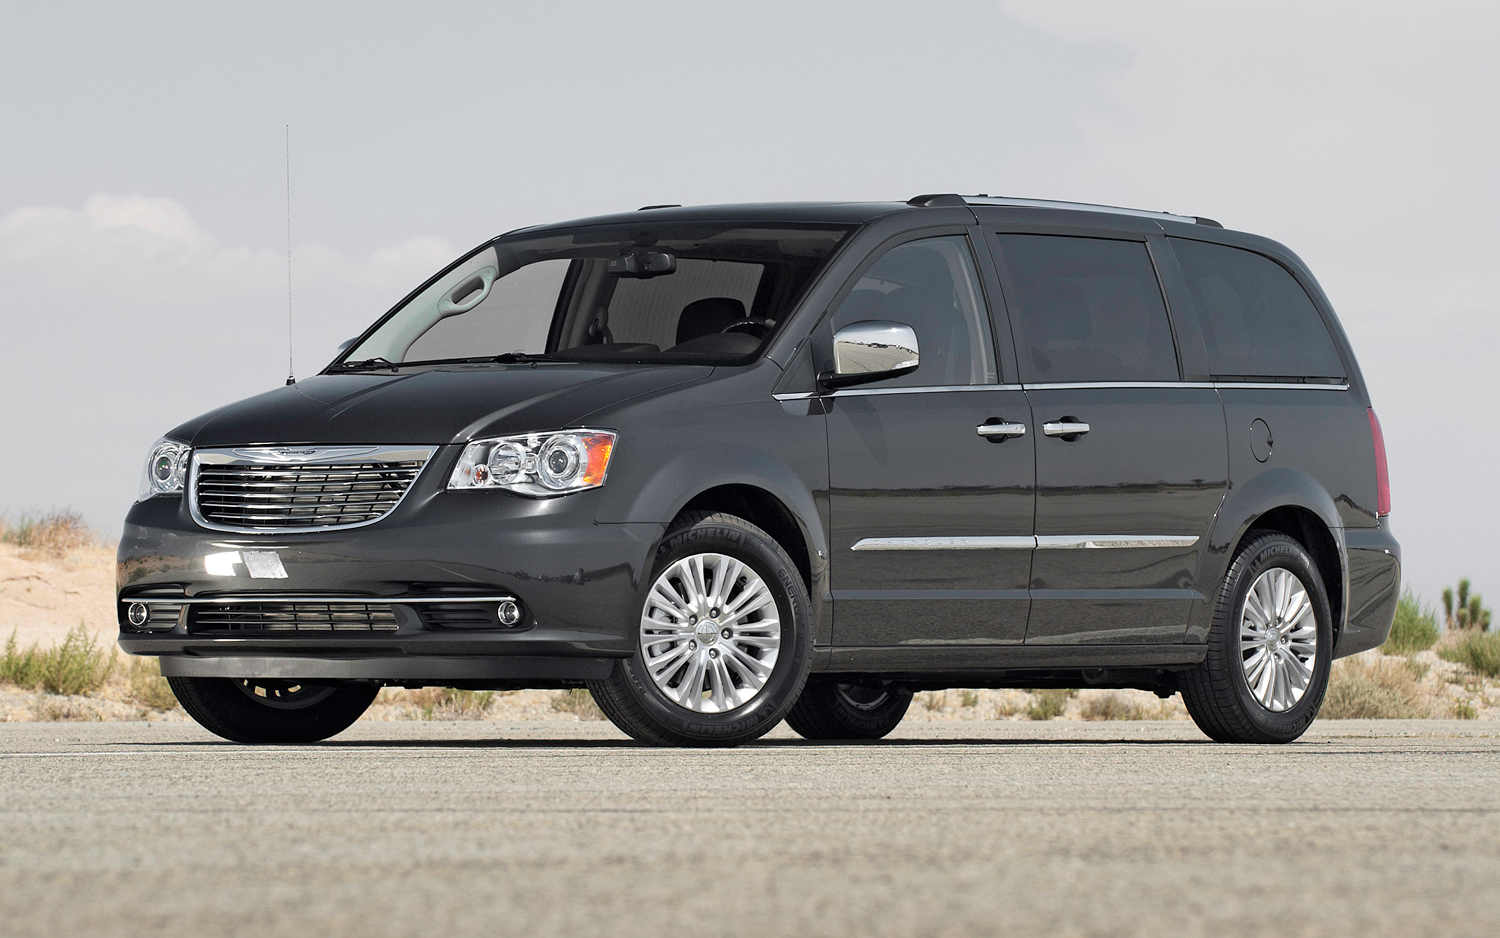 2012 Chrysler Town and Country Information and photos